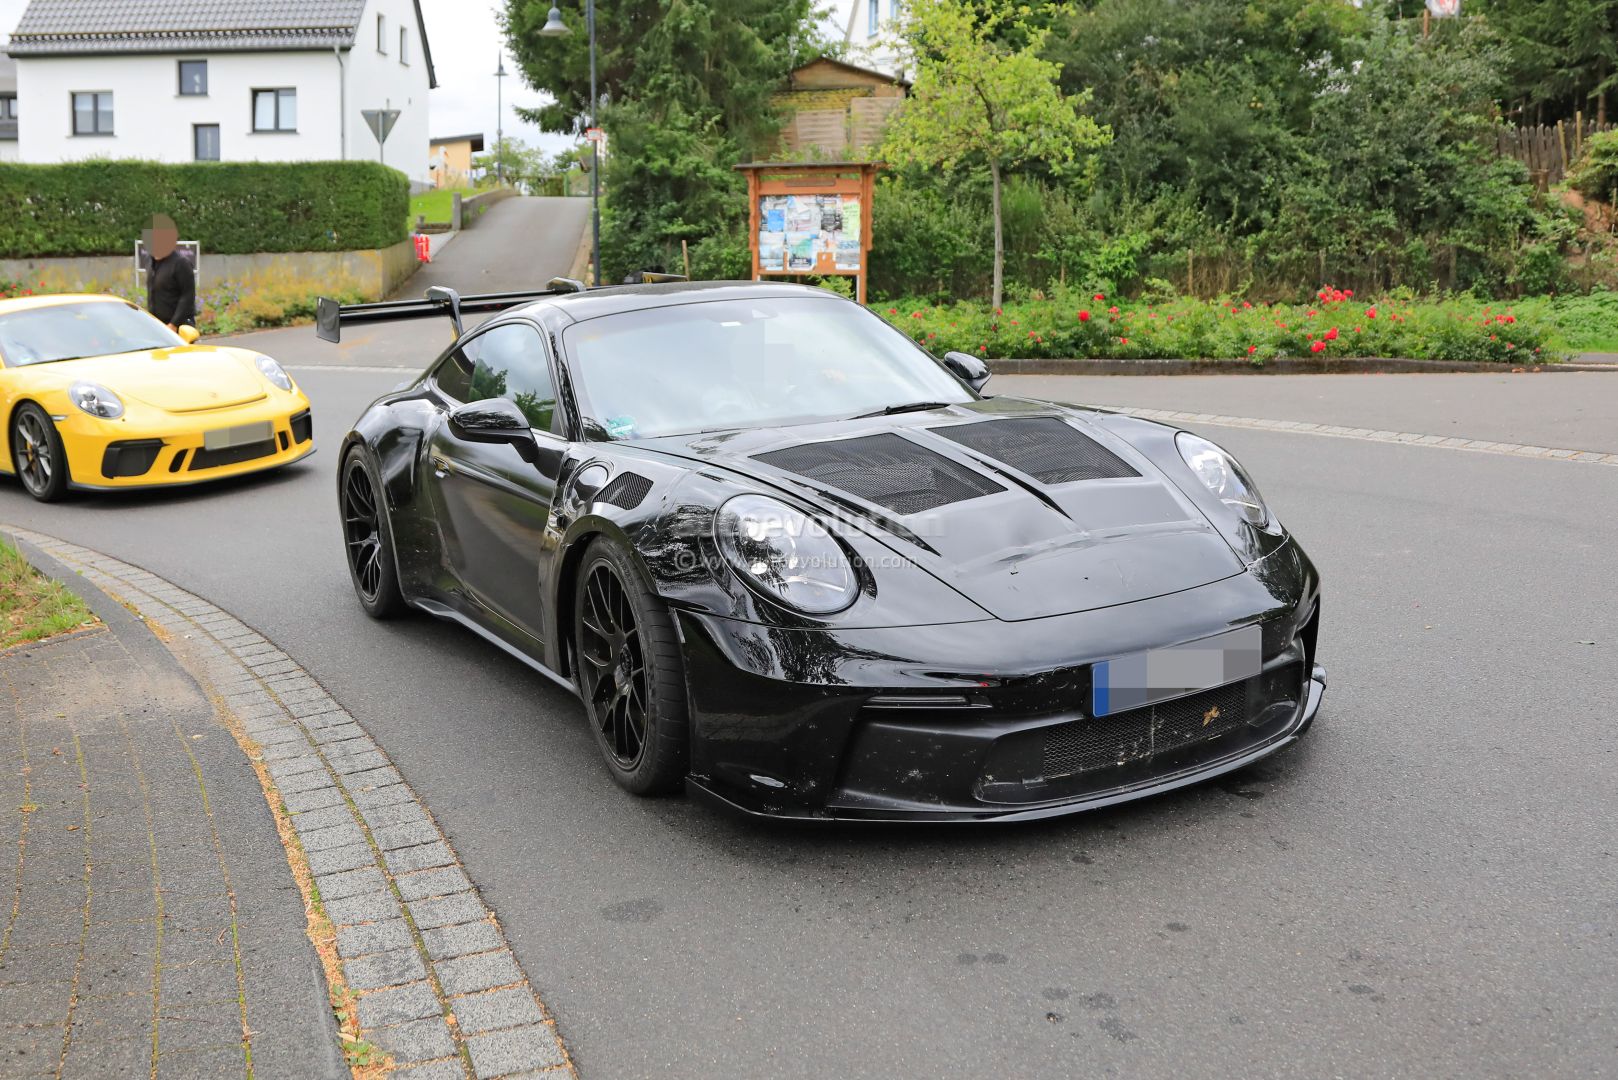 New 992 Porsche 911 GT3 RS Spotted in Traffic, the Wing Game Is Insane.